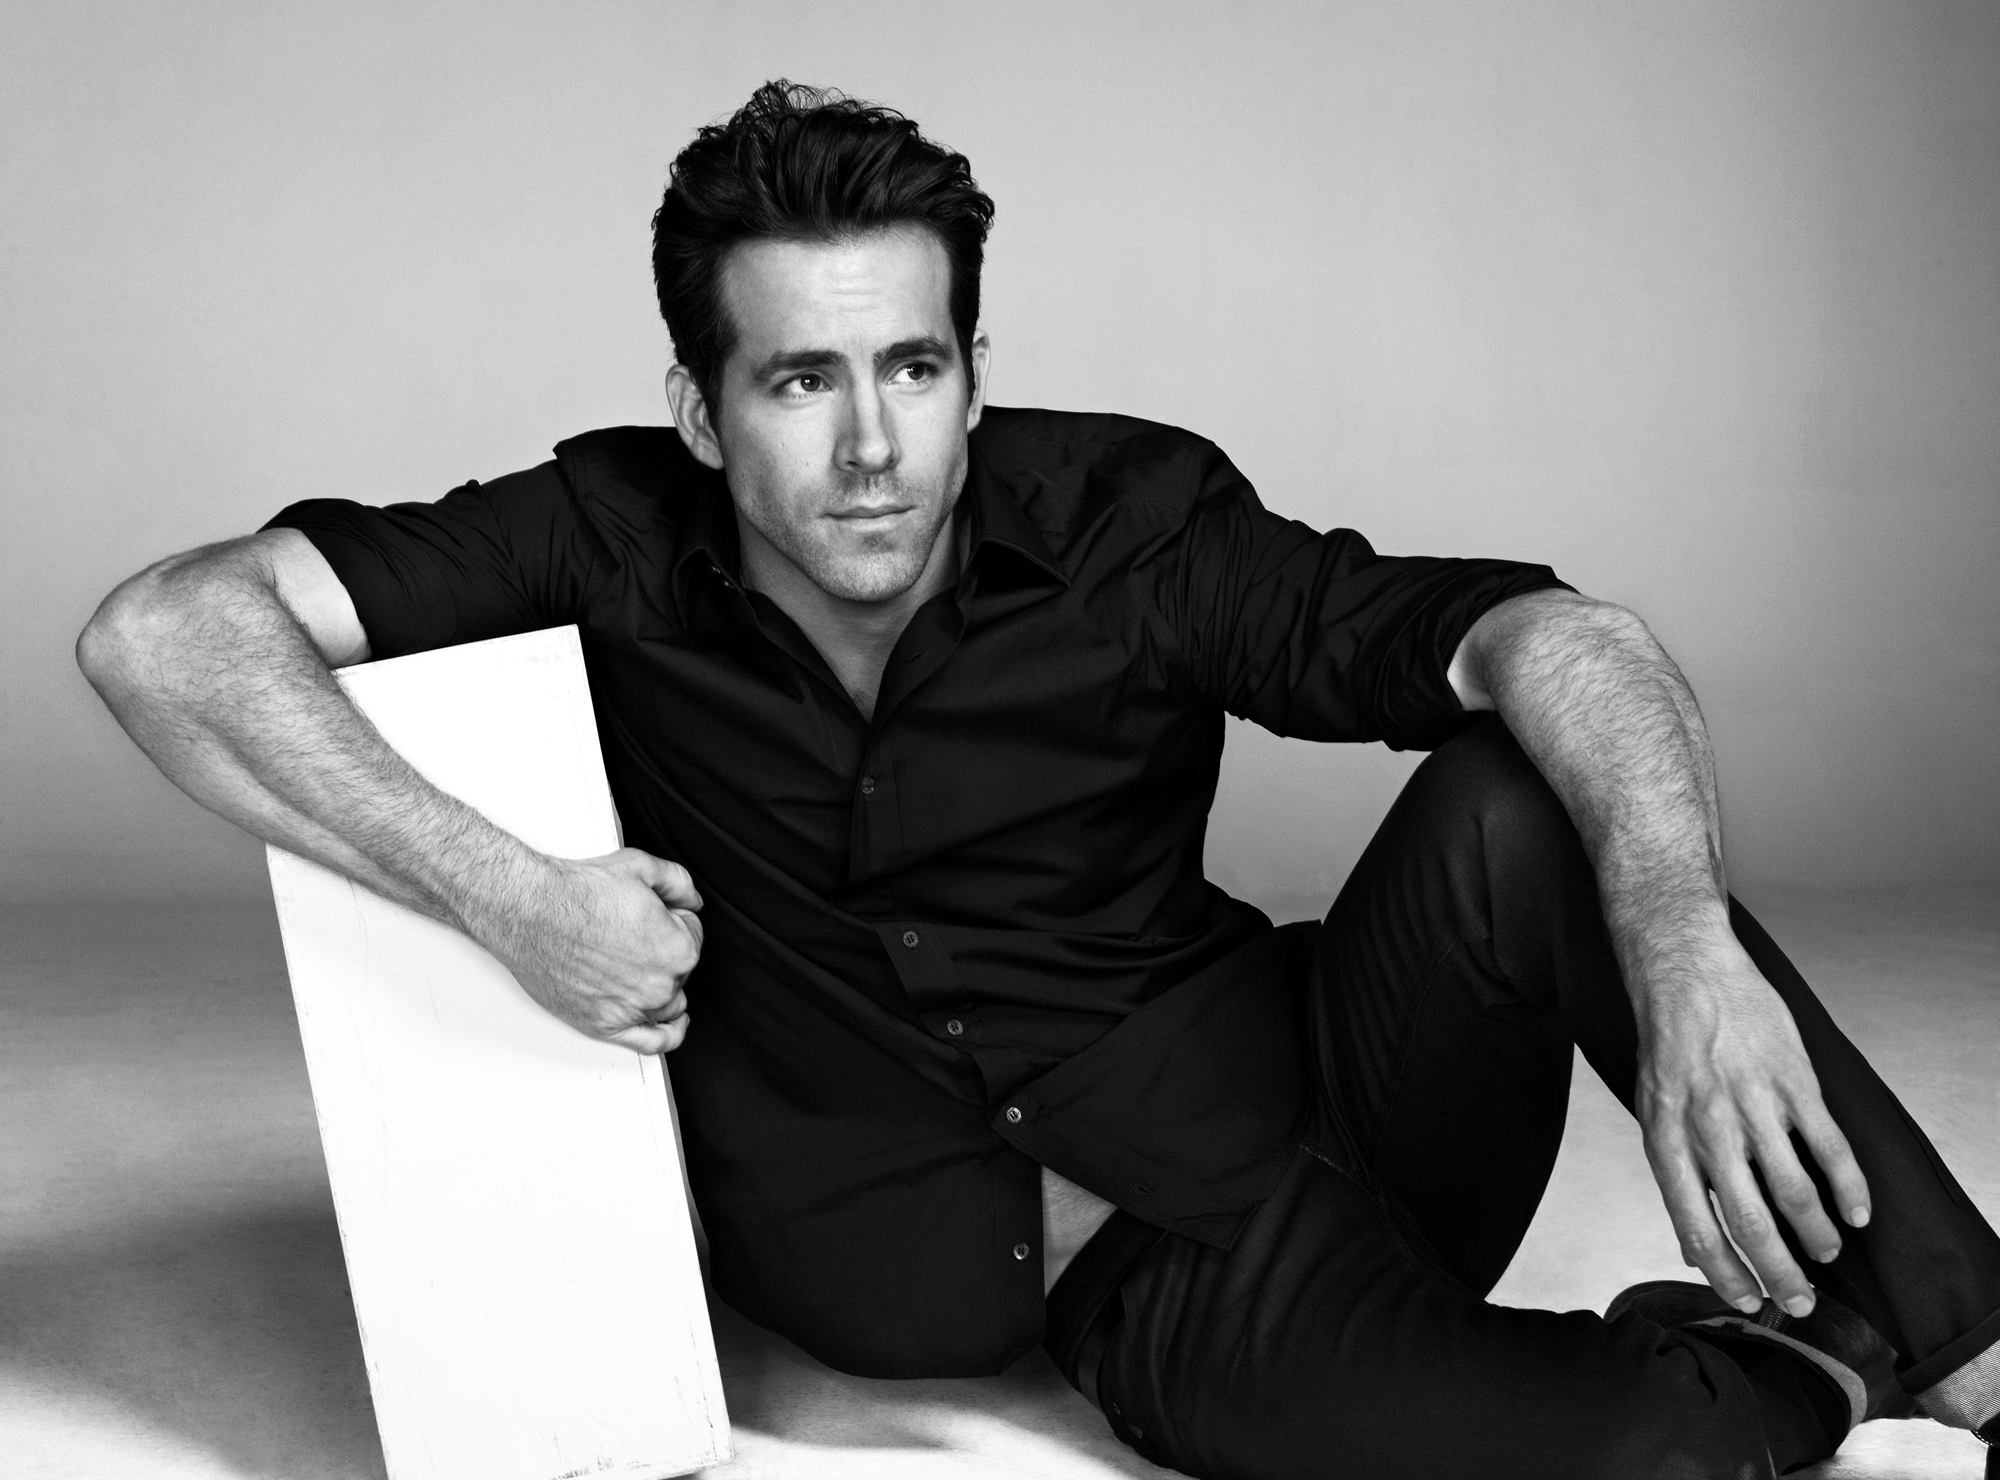 Free Download Ryan Reynolds Wallpapers High Resolution And Quality Download [2000x1480] For Your